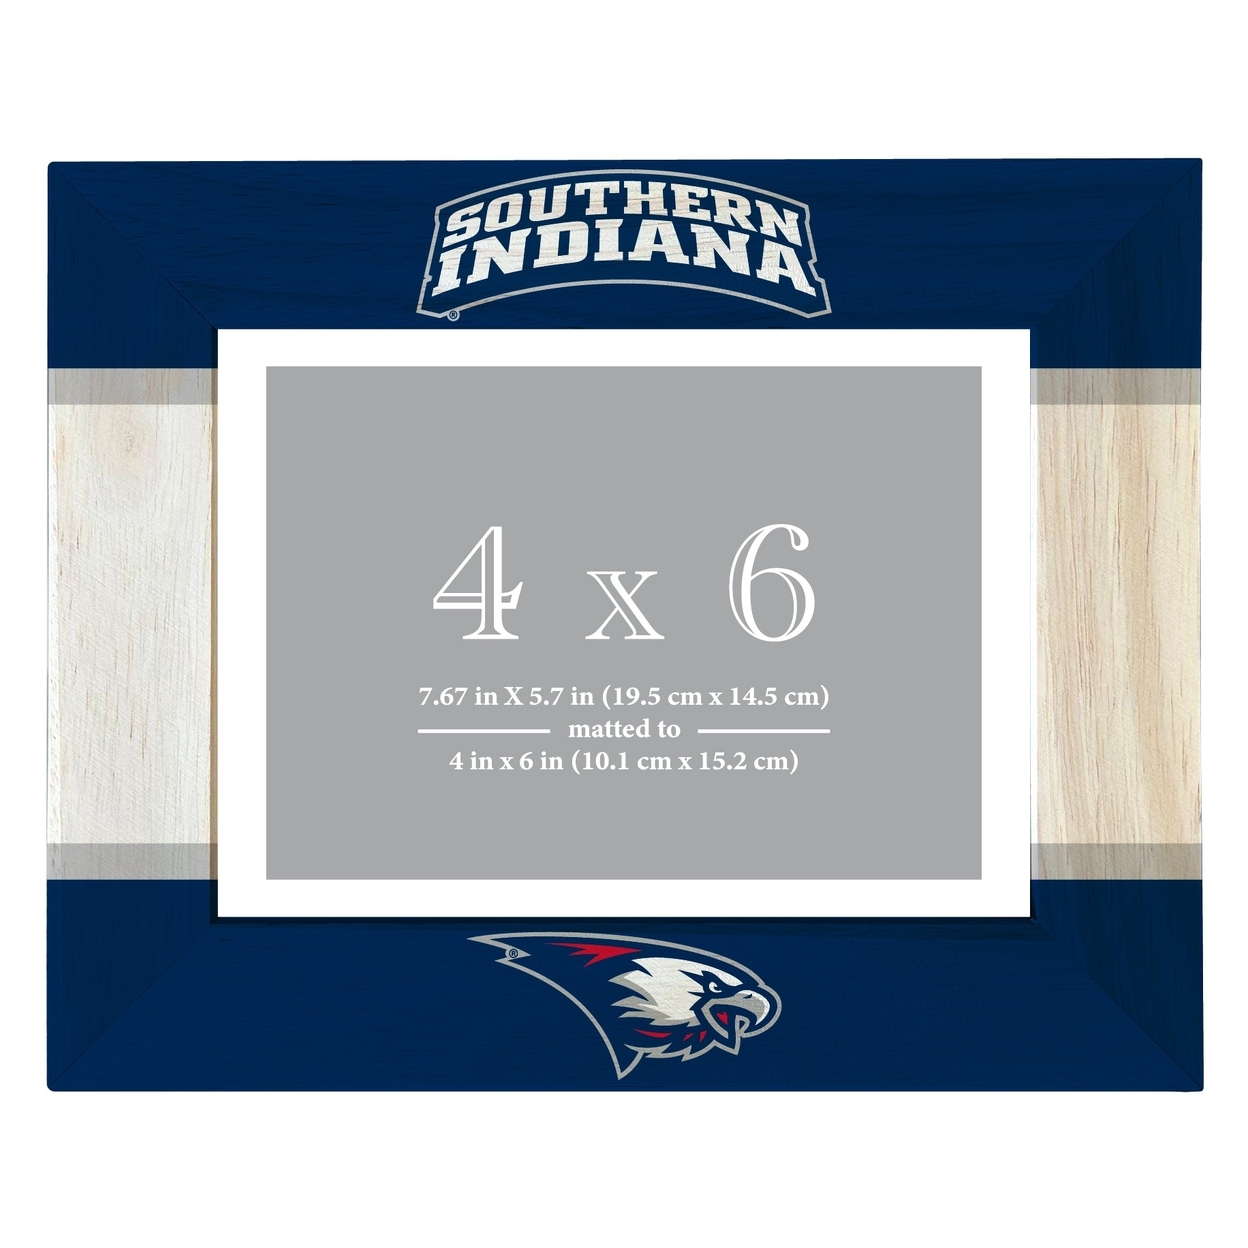 University Of Southern Indiana Wooden Photo Frame Matted To 4 X 6 Inch - Printed